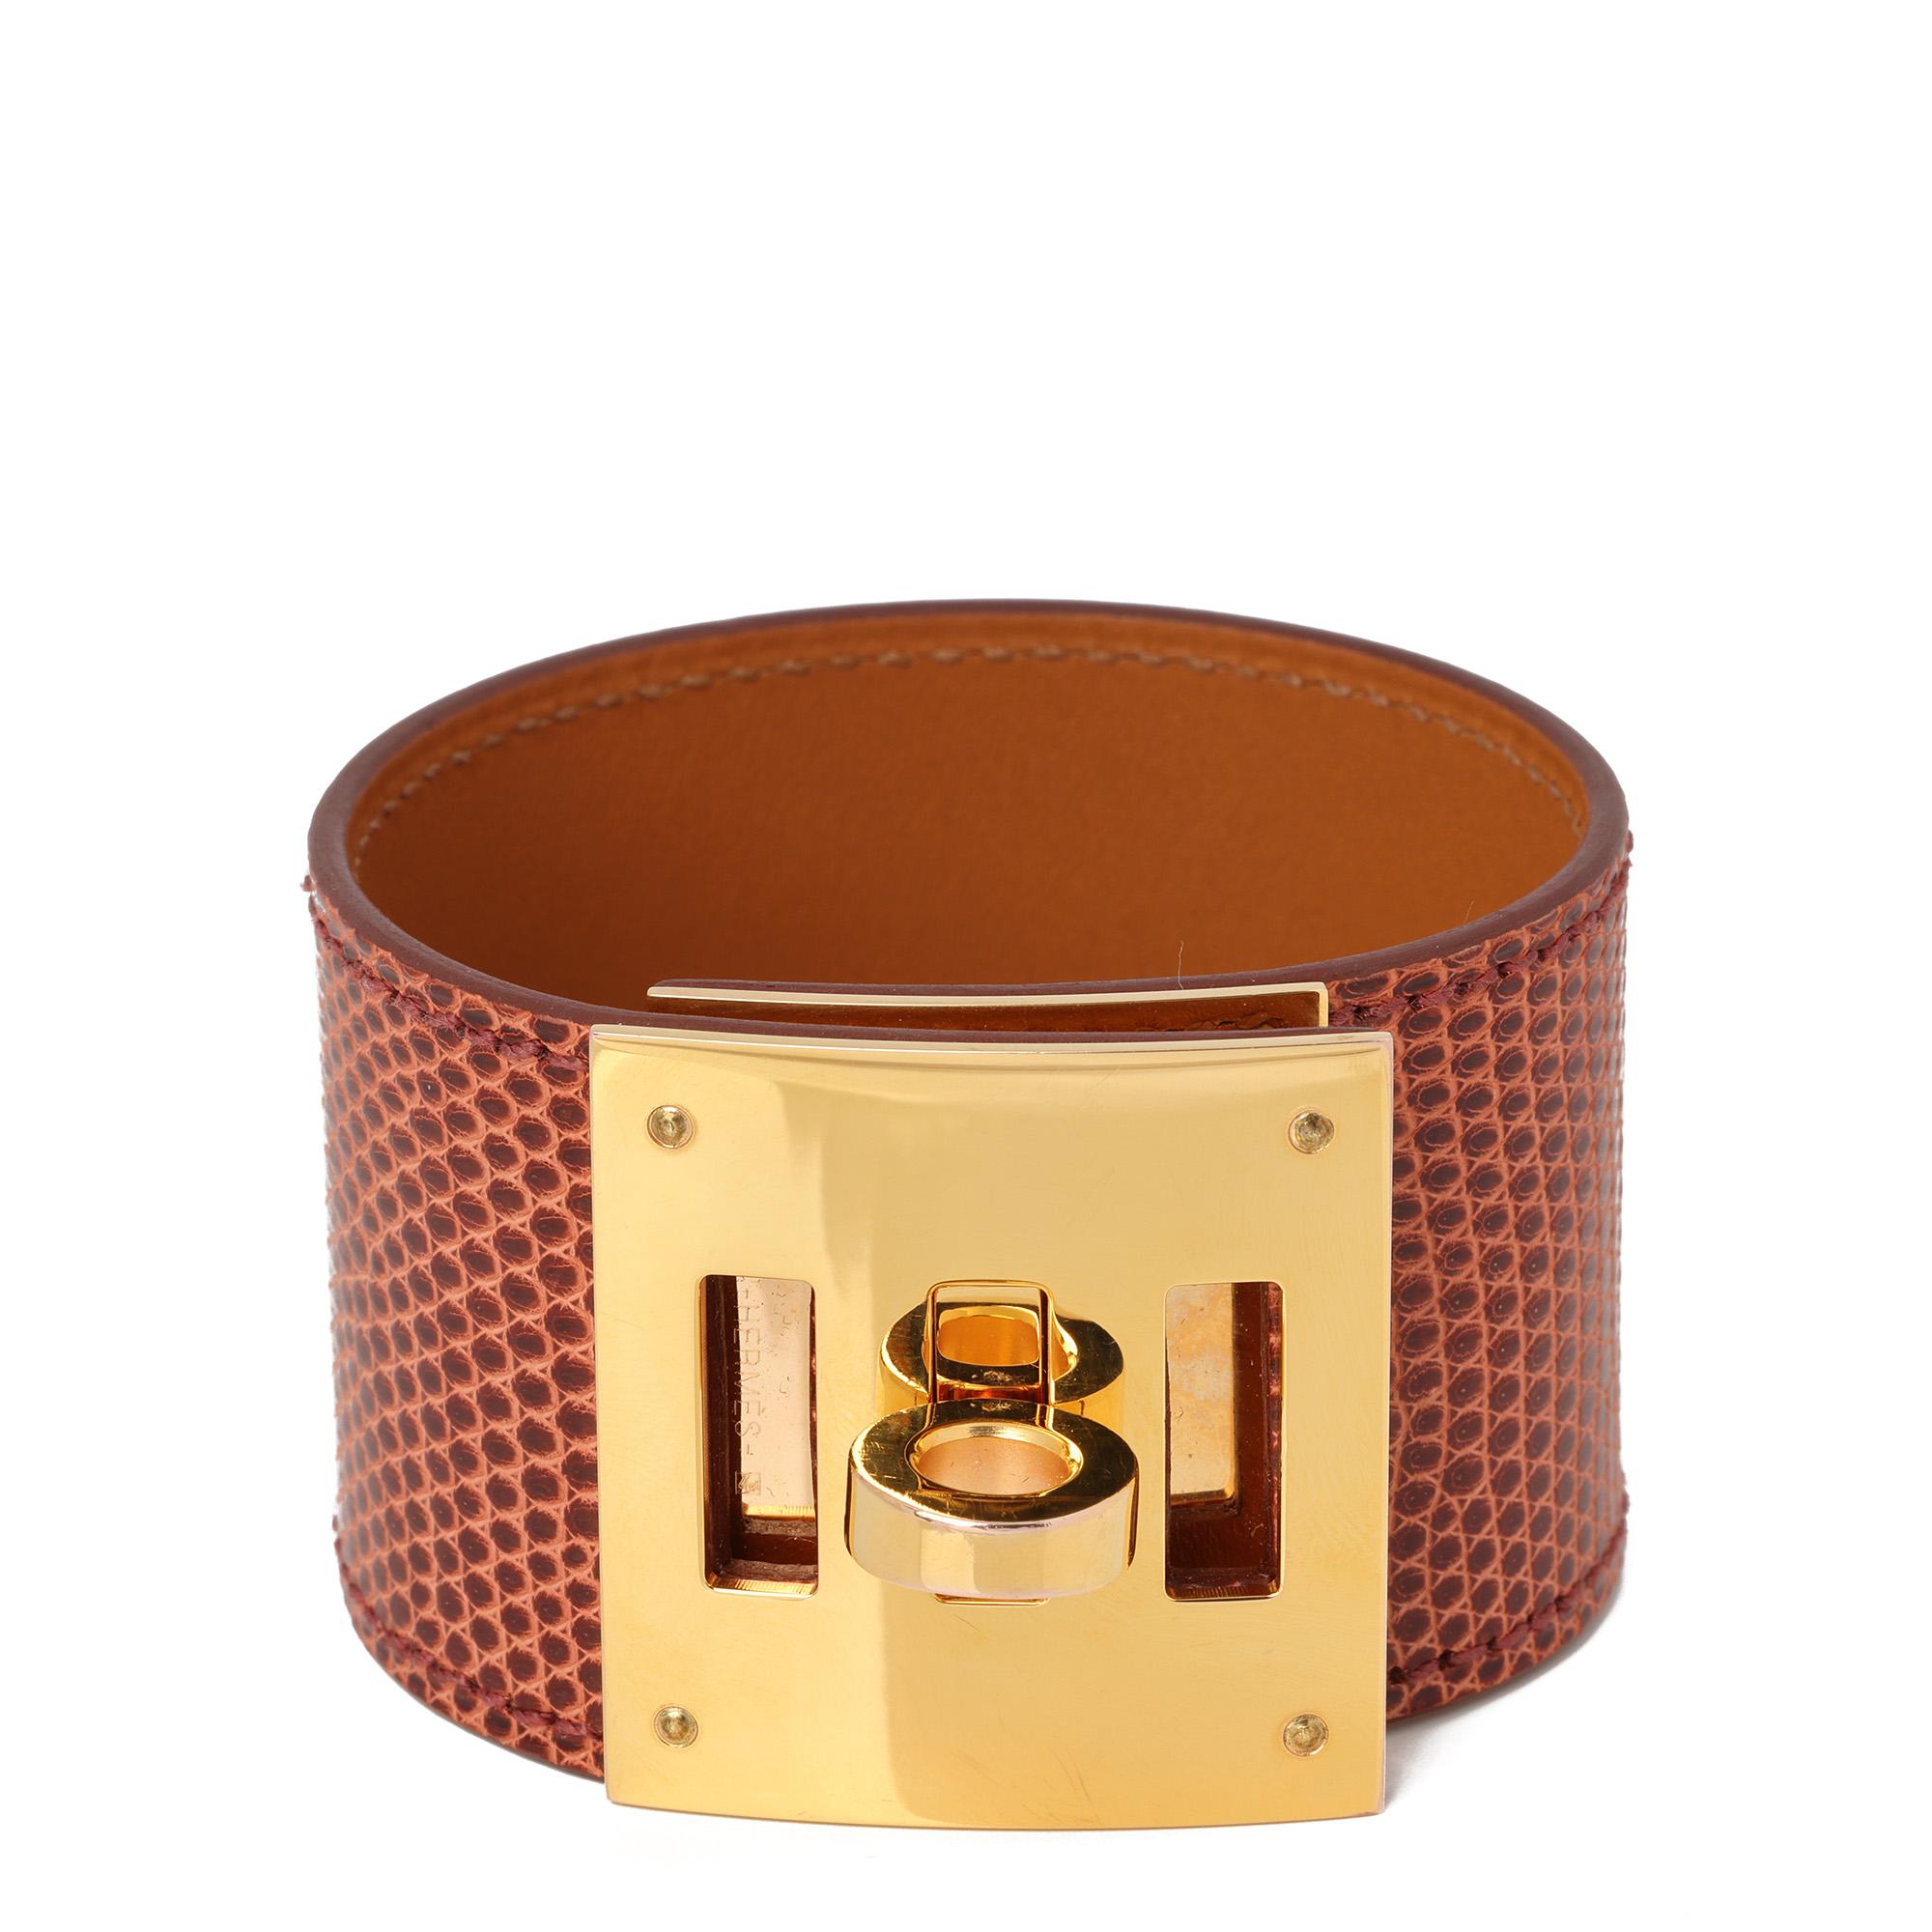 Hermès ÉTRUSQUE LIZARD LEATHER KELLY DOG BRACELET T2

CONDITION NOTES
The exterior in is exceptional condition with no signs of use.
The hardware is in exceptional condition with minimal signs of use.
Overall this item is in exceptional pre-owned